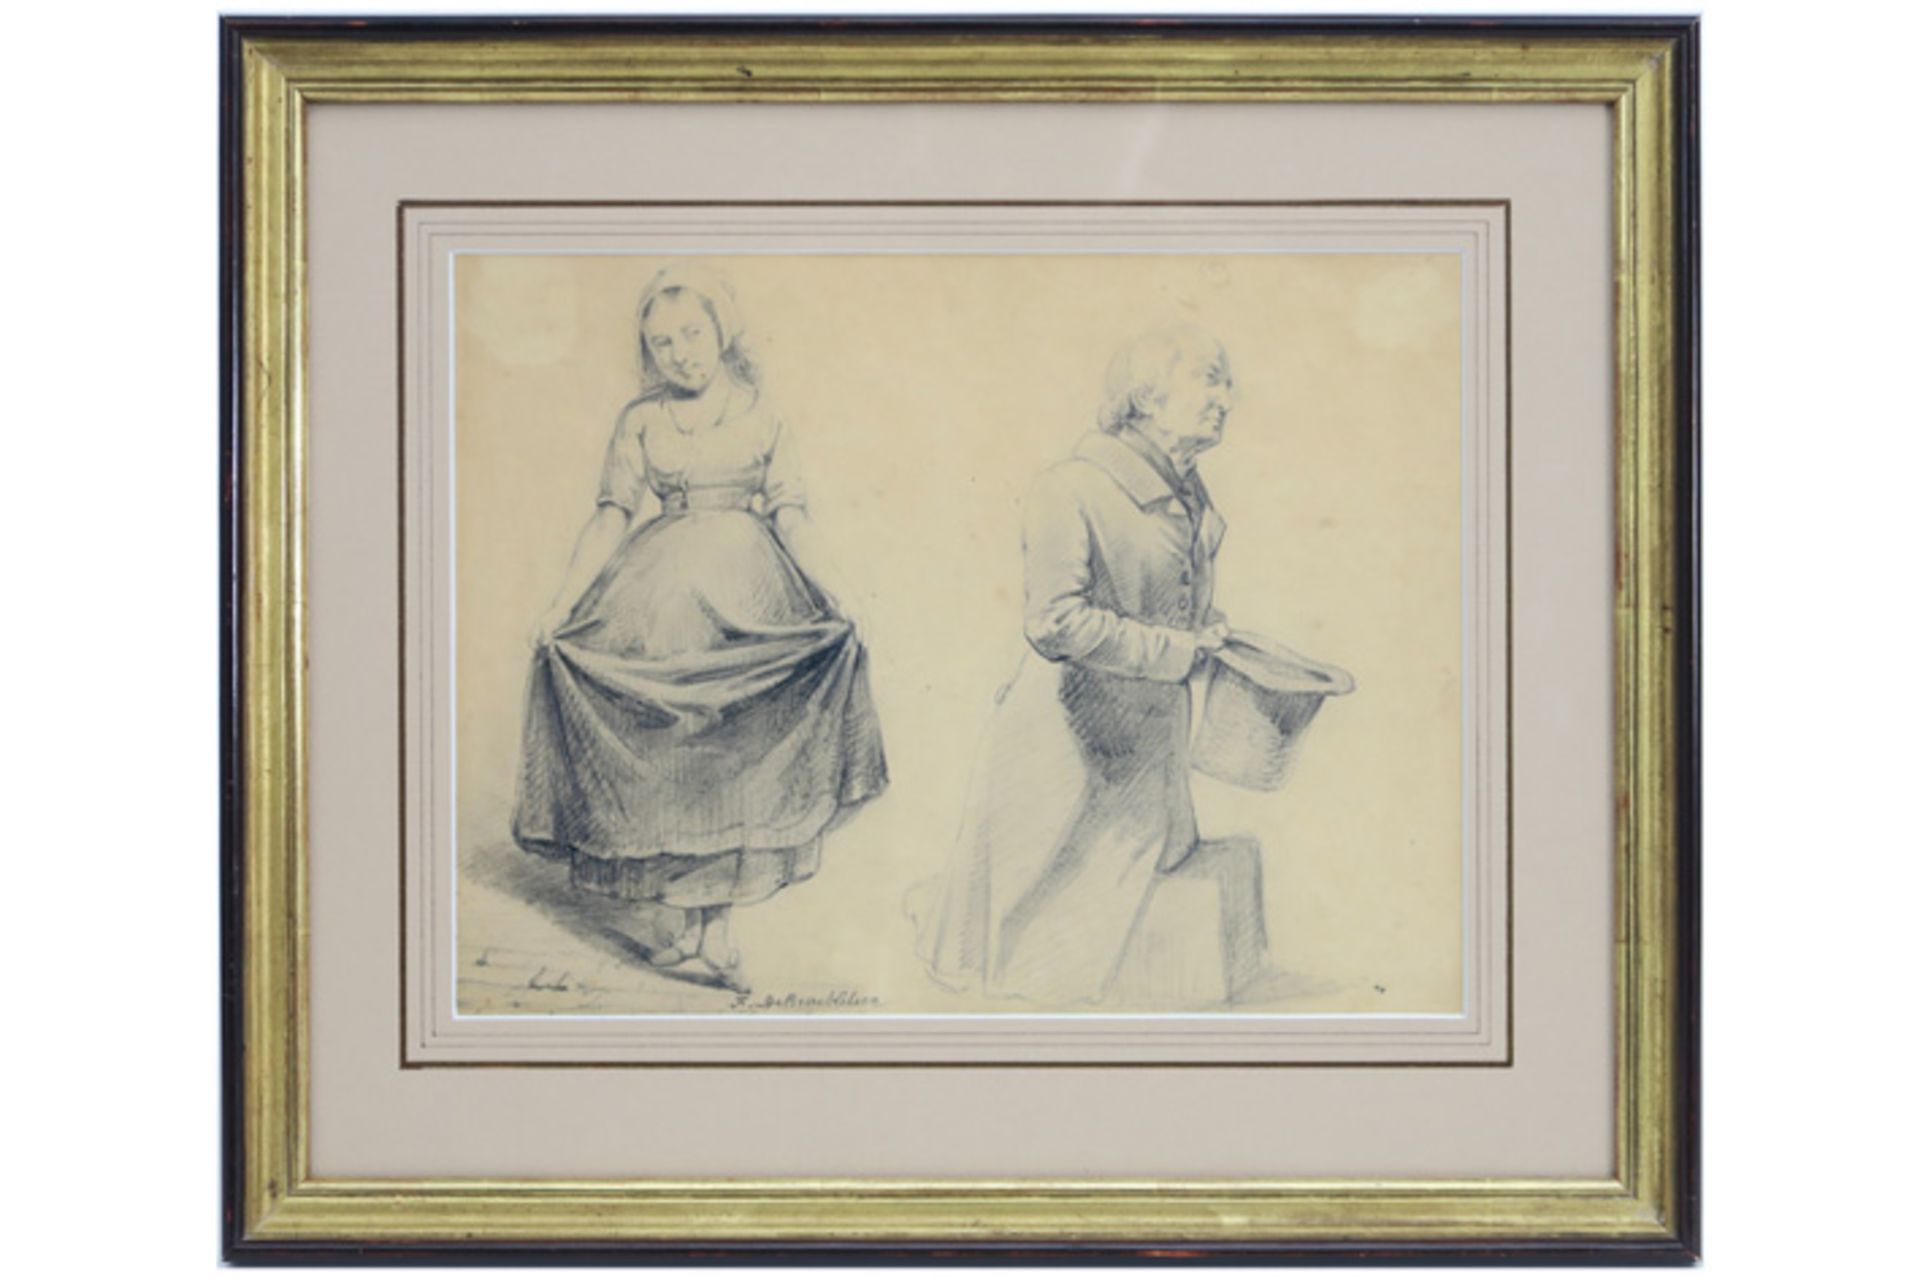 two 19th Cent. Belgian drawings - signed Ferdinand De Braekeleer || DE BRAEKELEER FERDINAND ( - Image 3 of 3